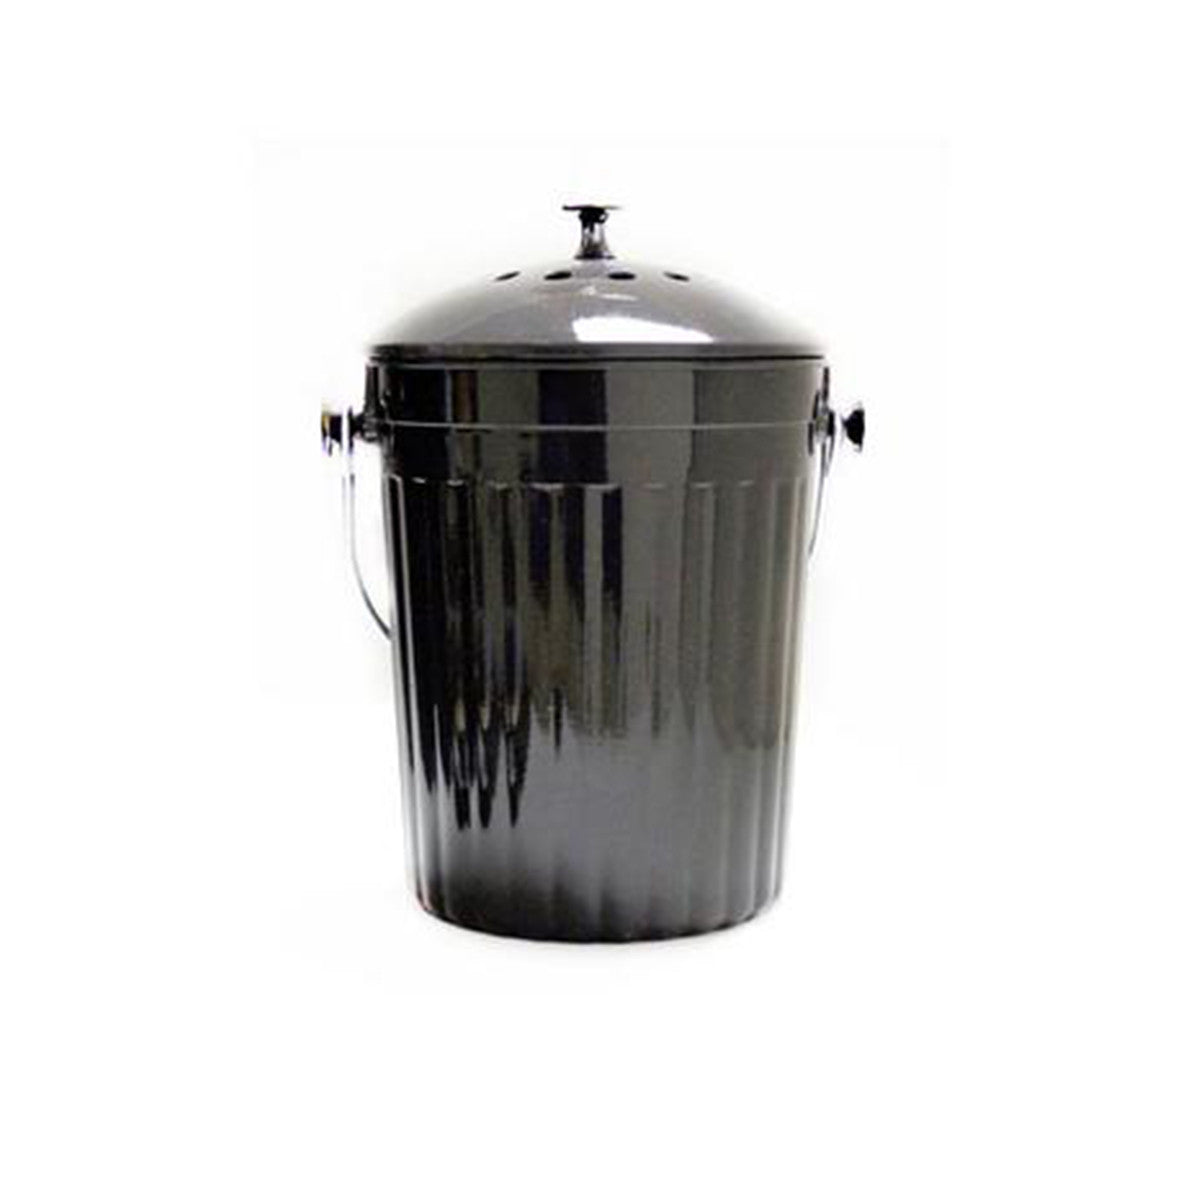 Compost Bin Countertop Composter Bucket with Lid Abakoo 1.6 Gallon Stainless Steel Kitchen Waste Pail Plus 4pcs Bonus Charcoal Filters Clean & Odor